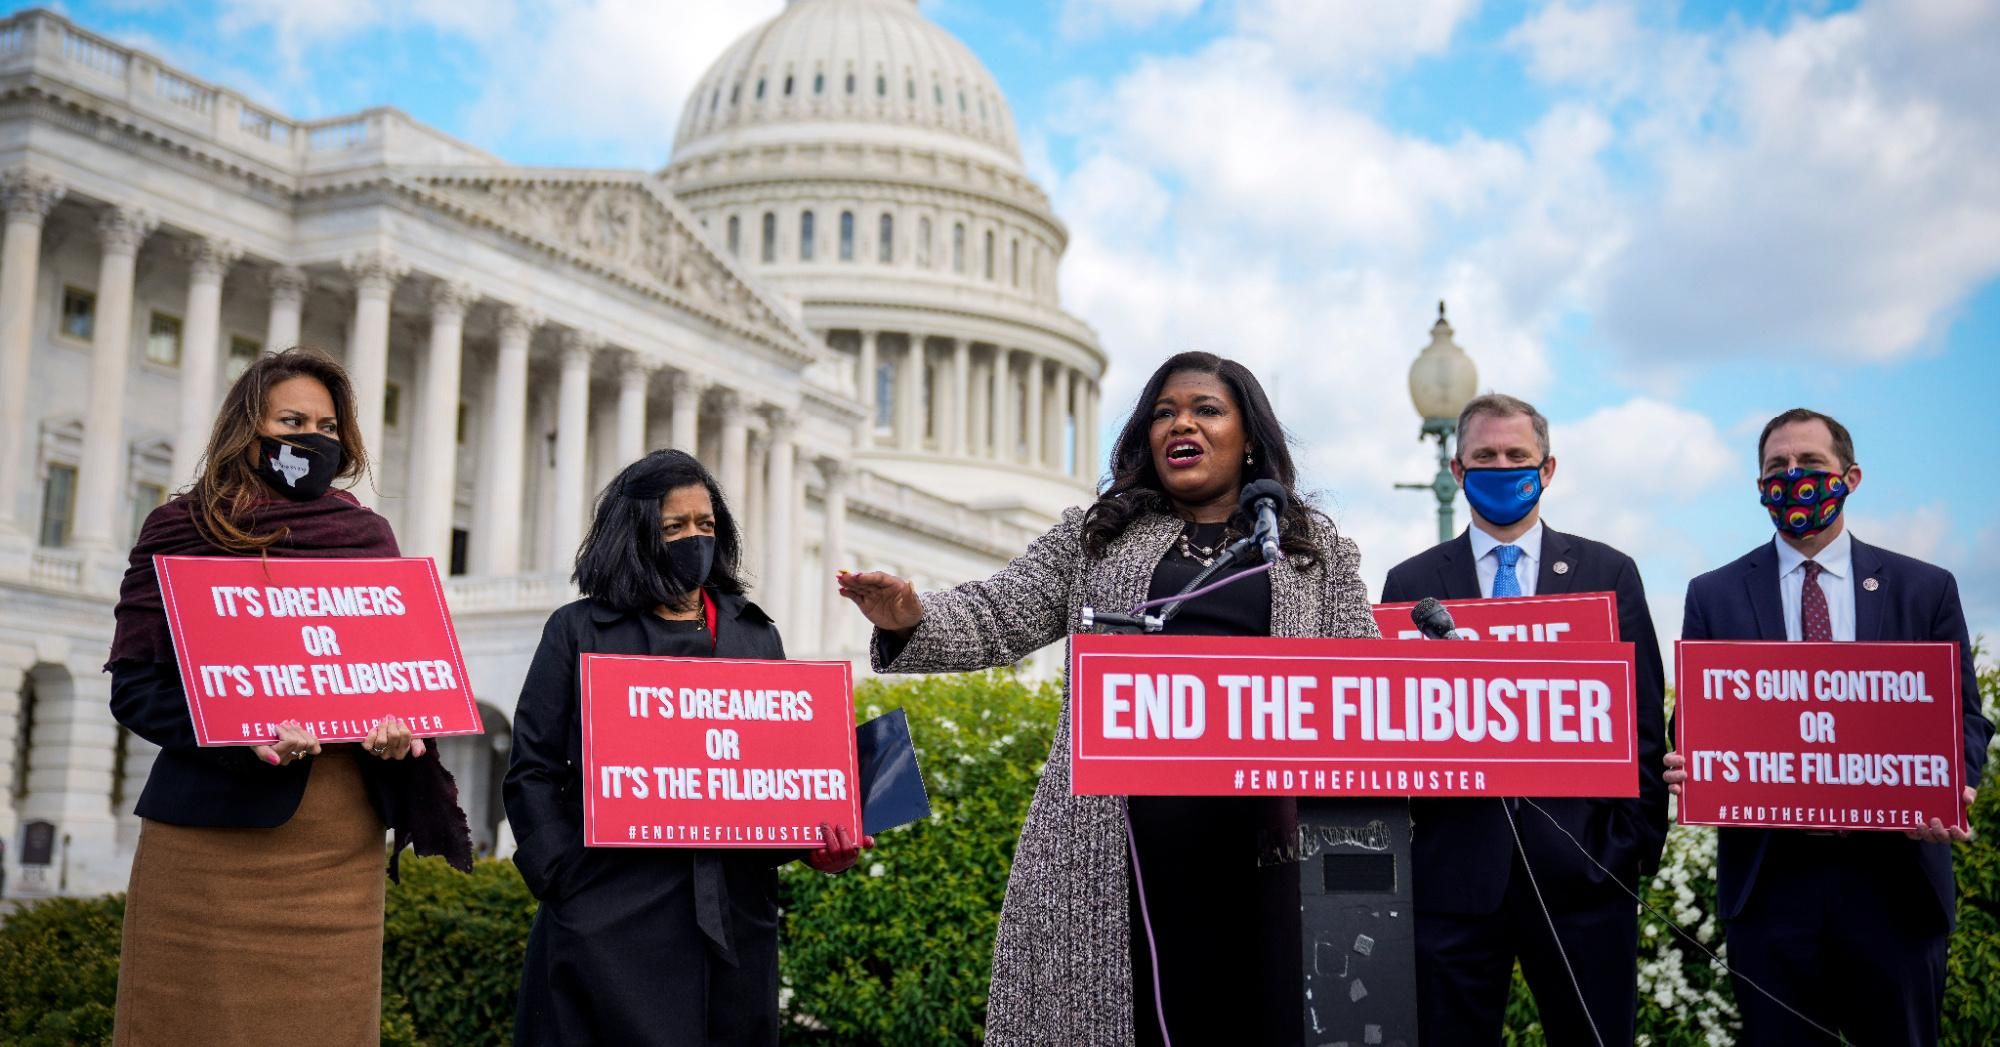 Rep. Cori Bush (D-Mo.) speaks during a news conference outside the U.S. Capitol to advocate for ending the Senate filibuster on April 22, 2021 in Washington, D.C.